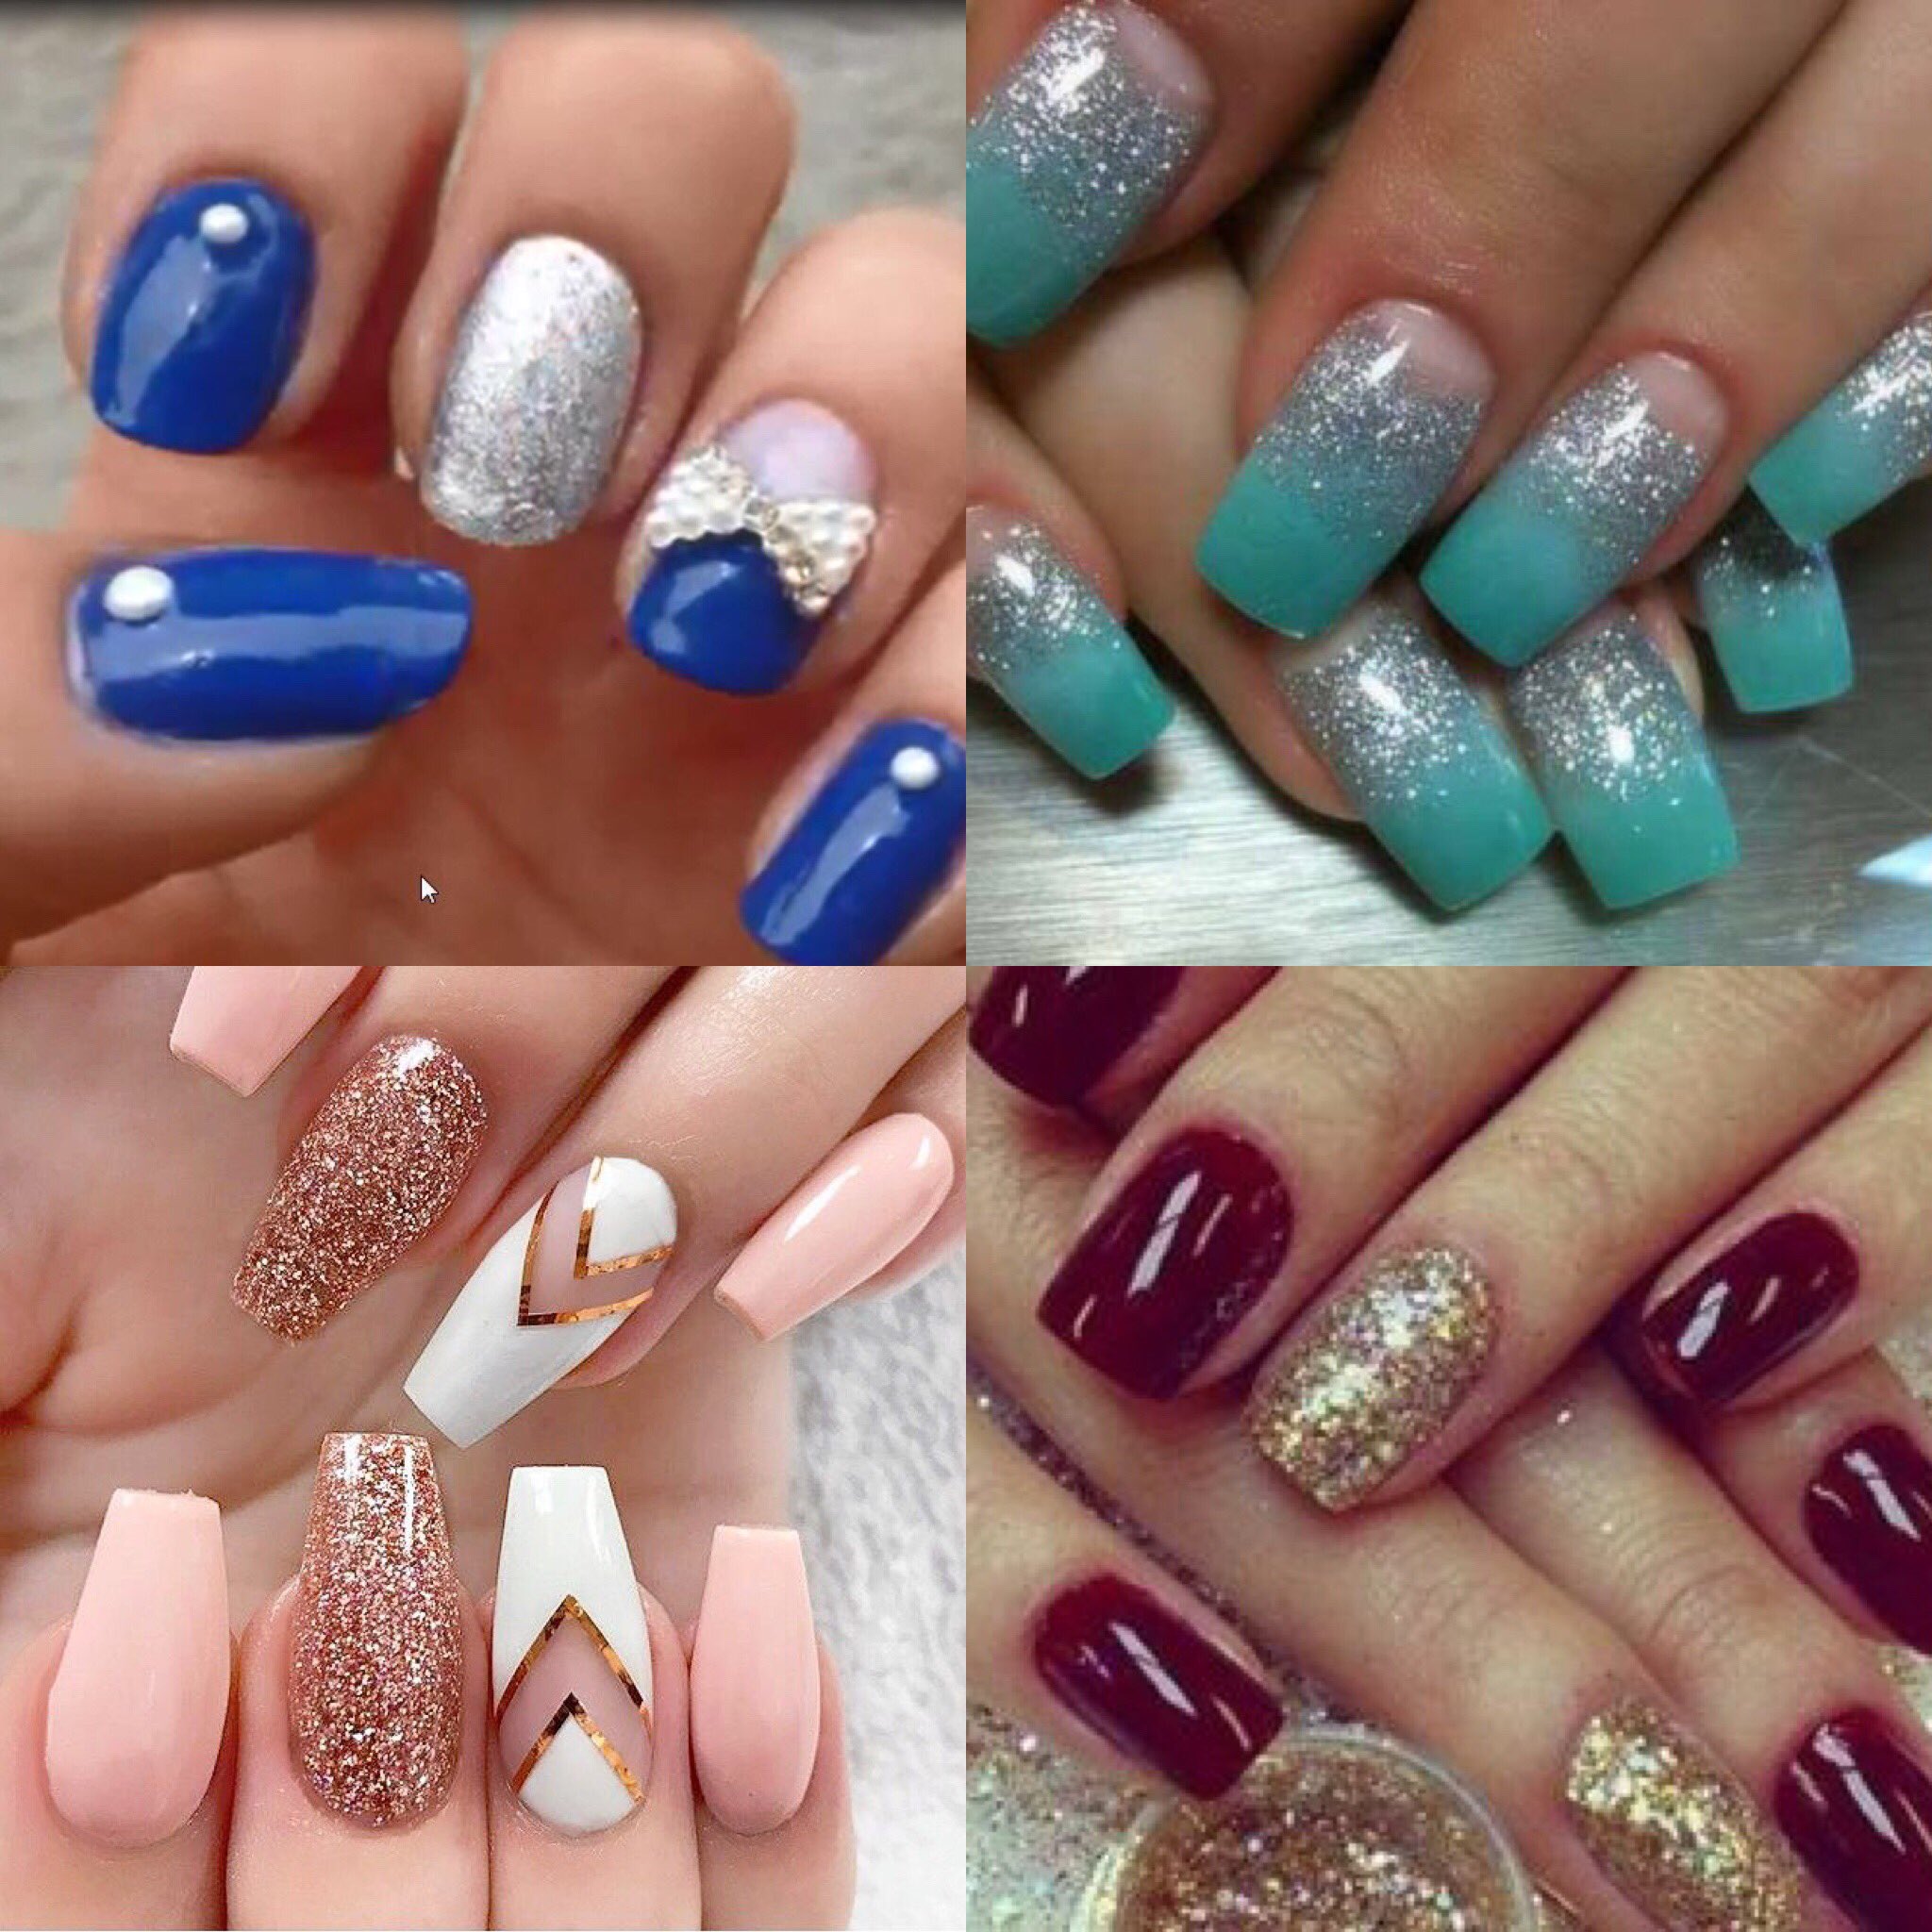 Betty Nails: Party Dress Ideas for a Fairy Tale Romantic Valentines Day